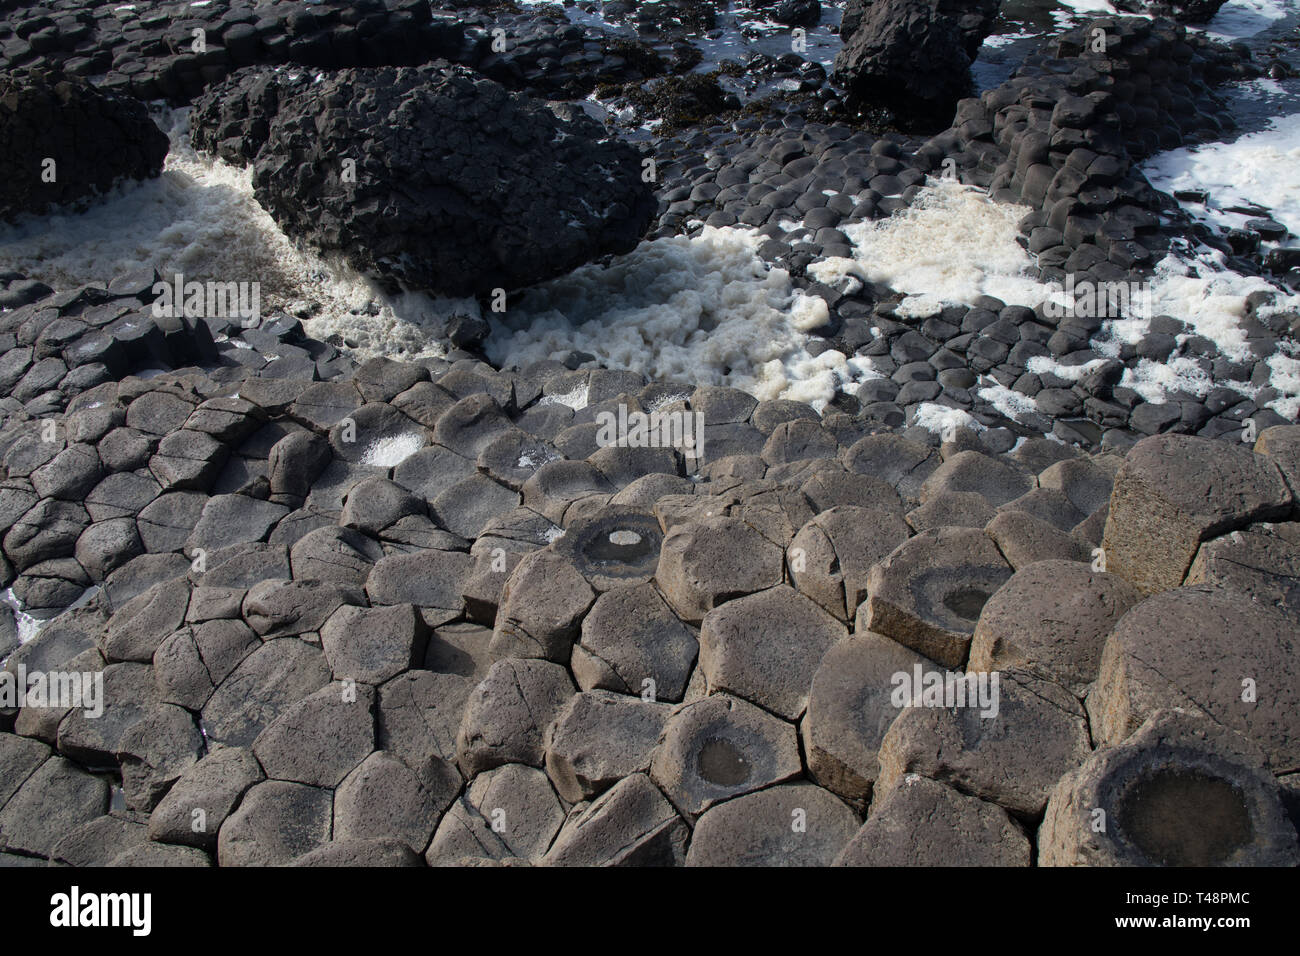 Hexagonal stones at the Giant's Causeway in Northern Ireland Stock Photo